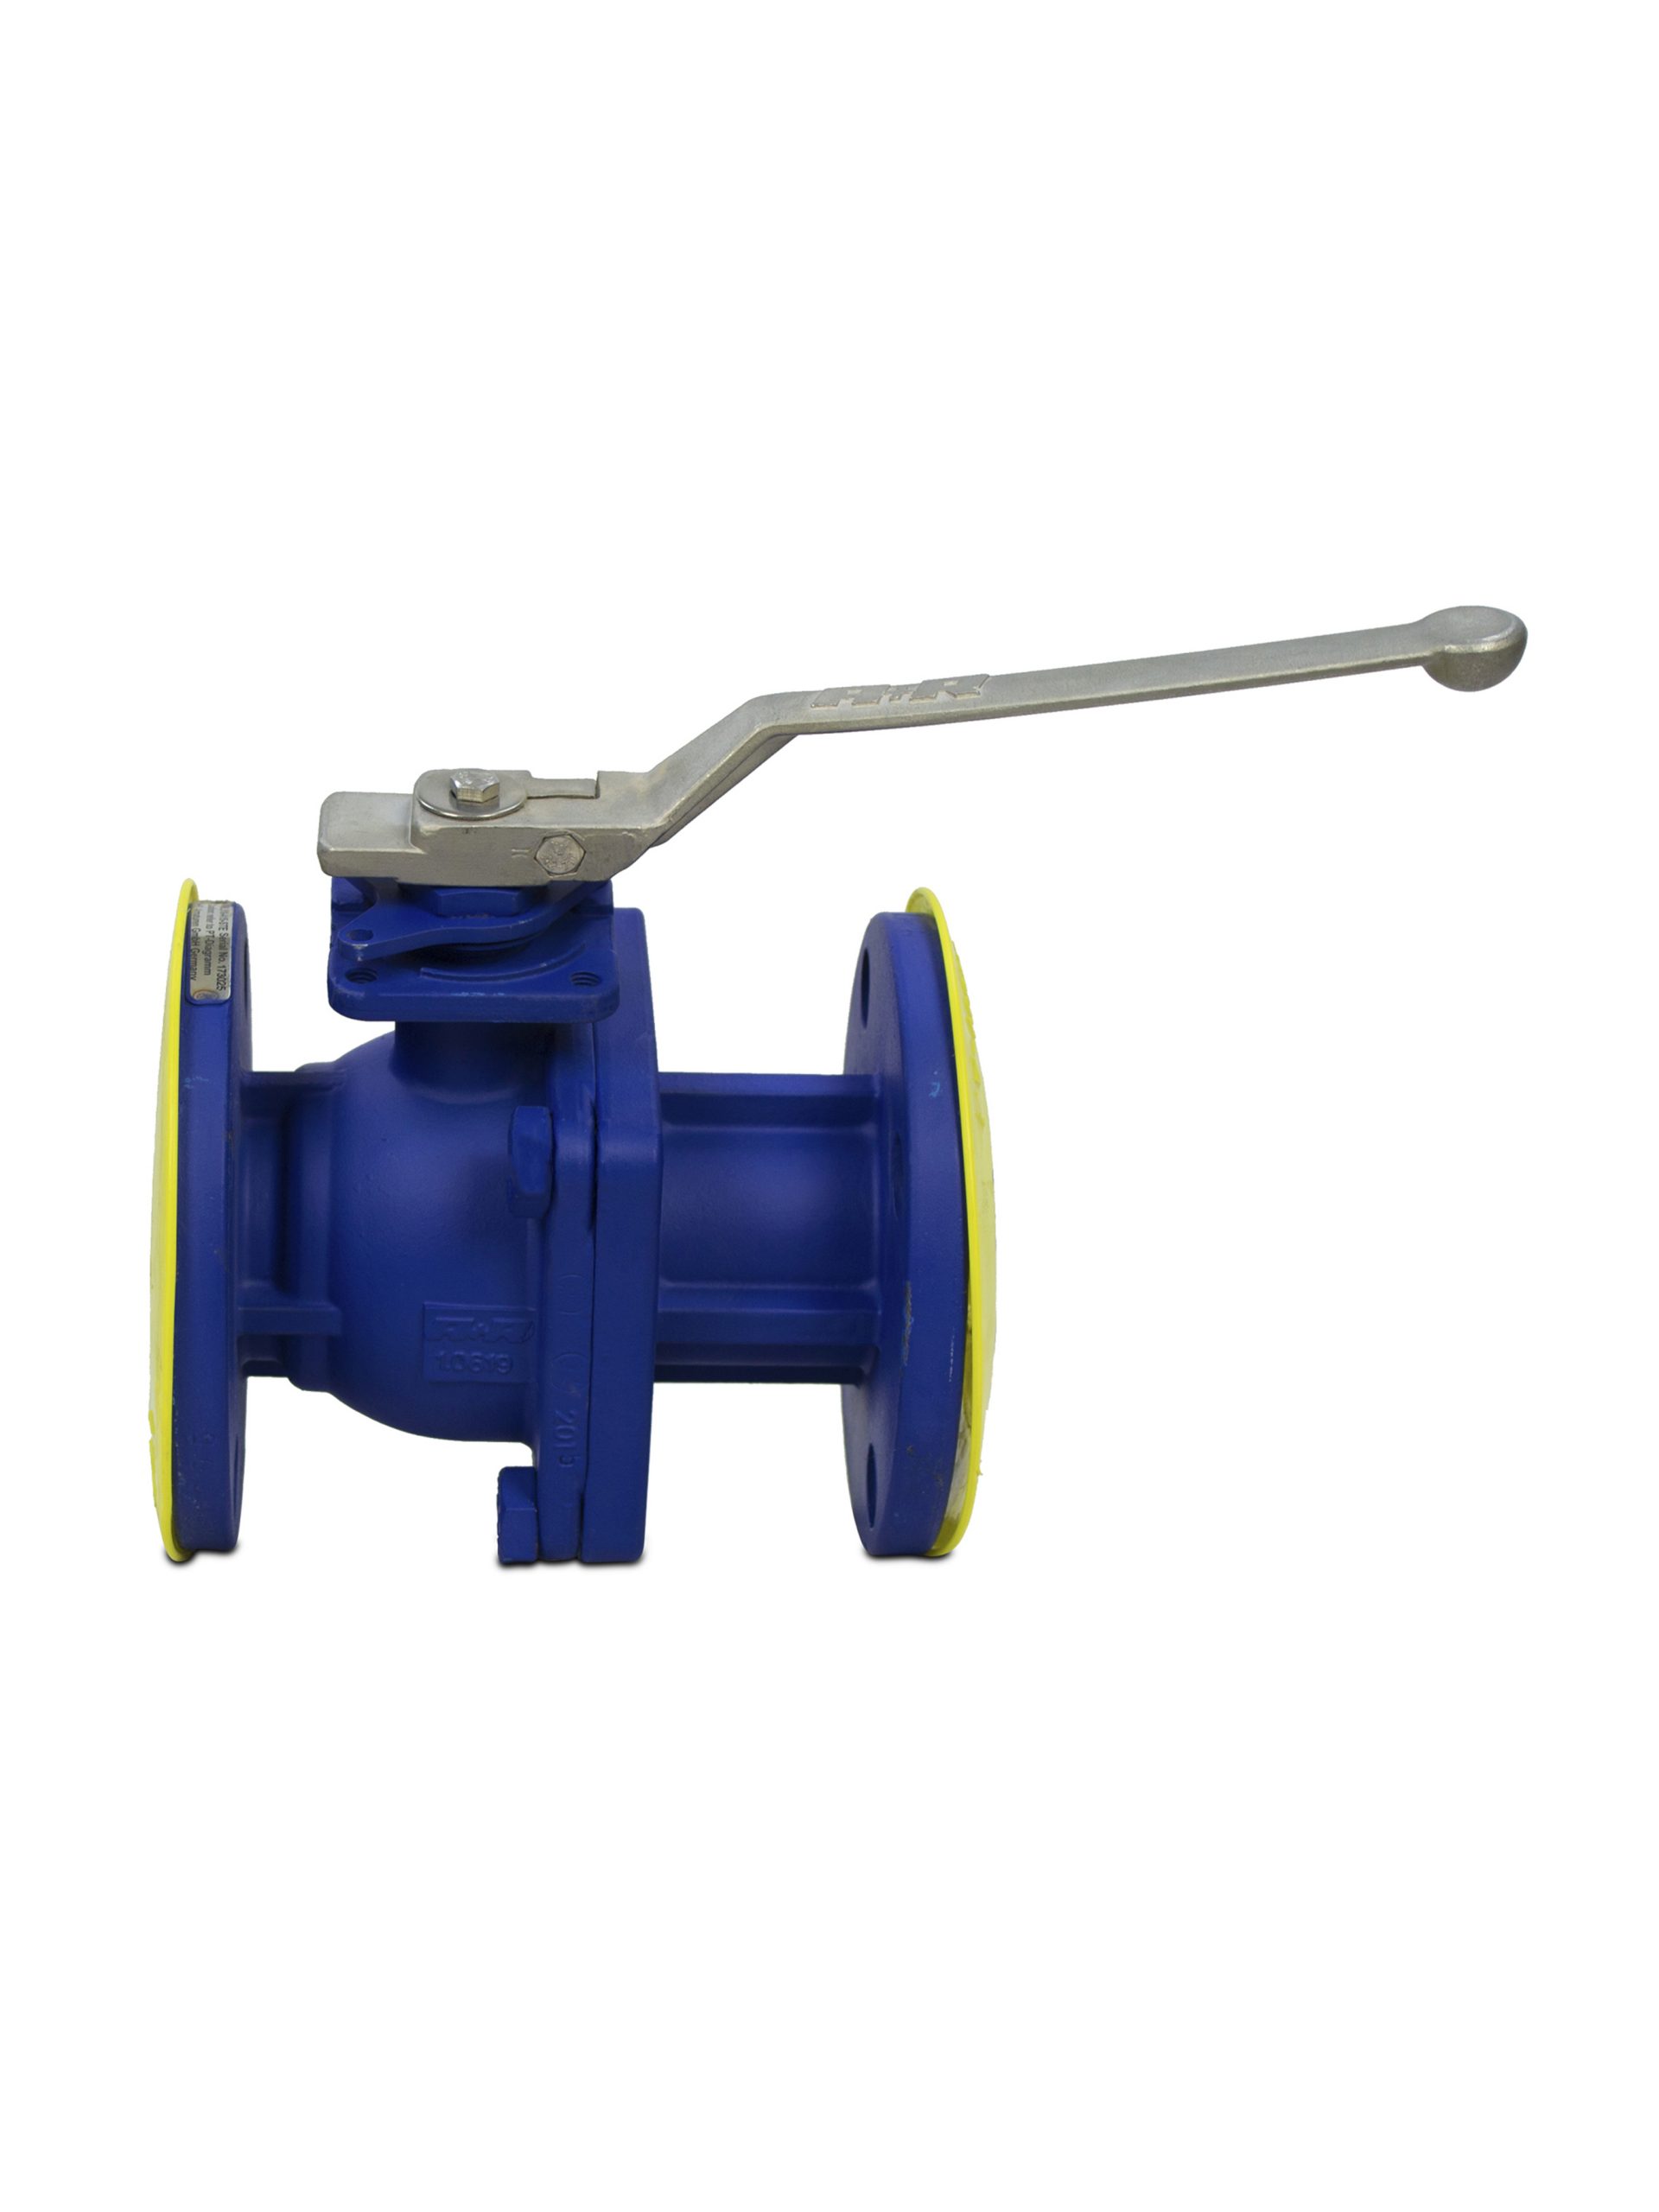 FLANGED BALL VALVE 1 1/2 INCHES in UAE